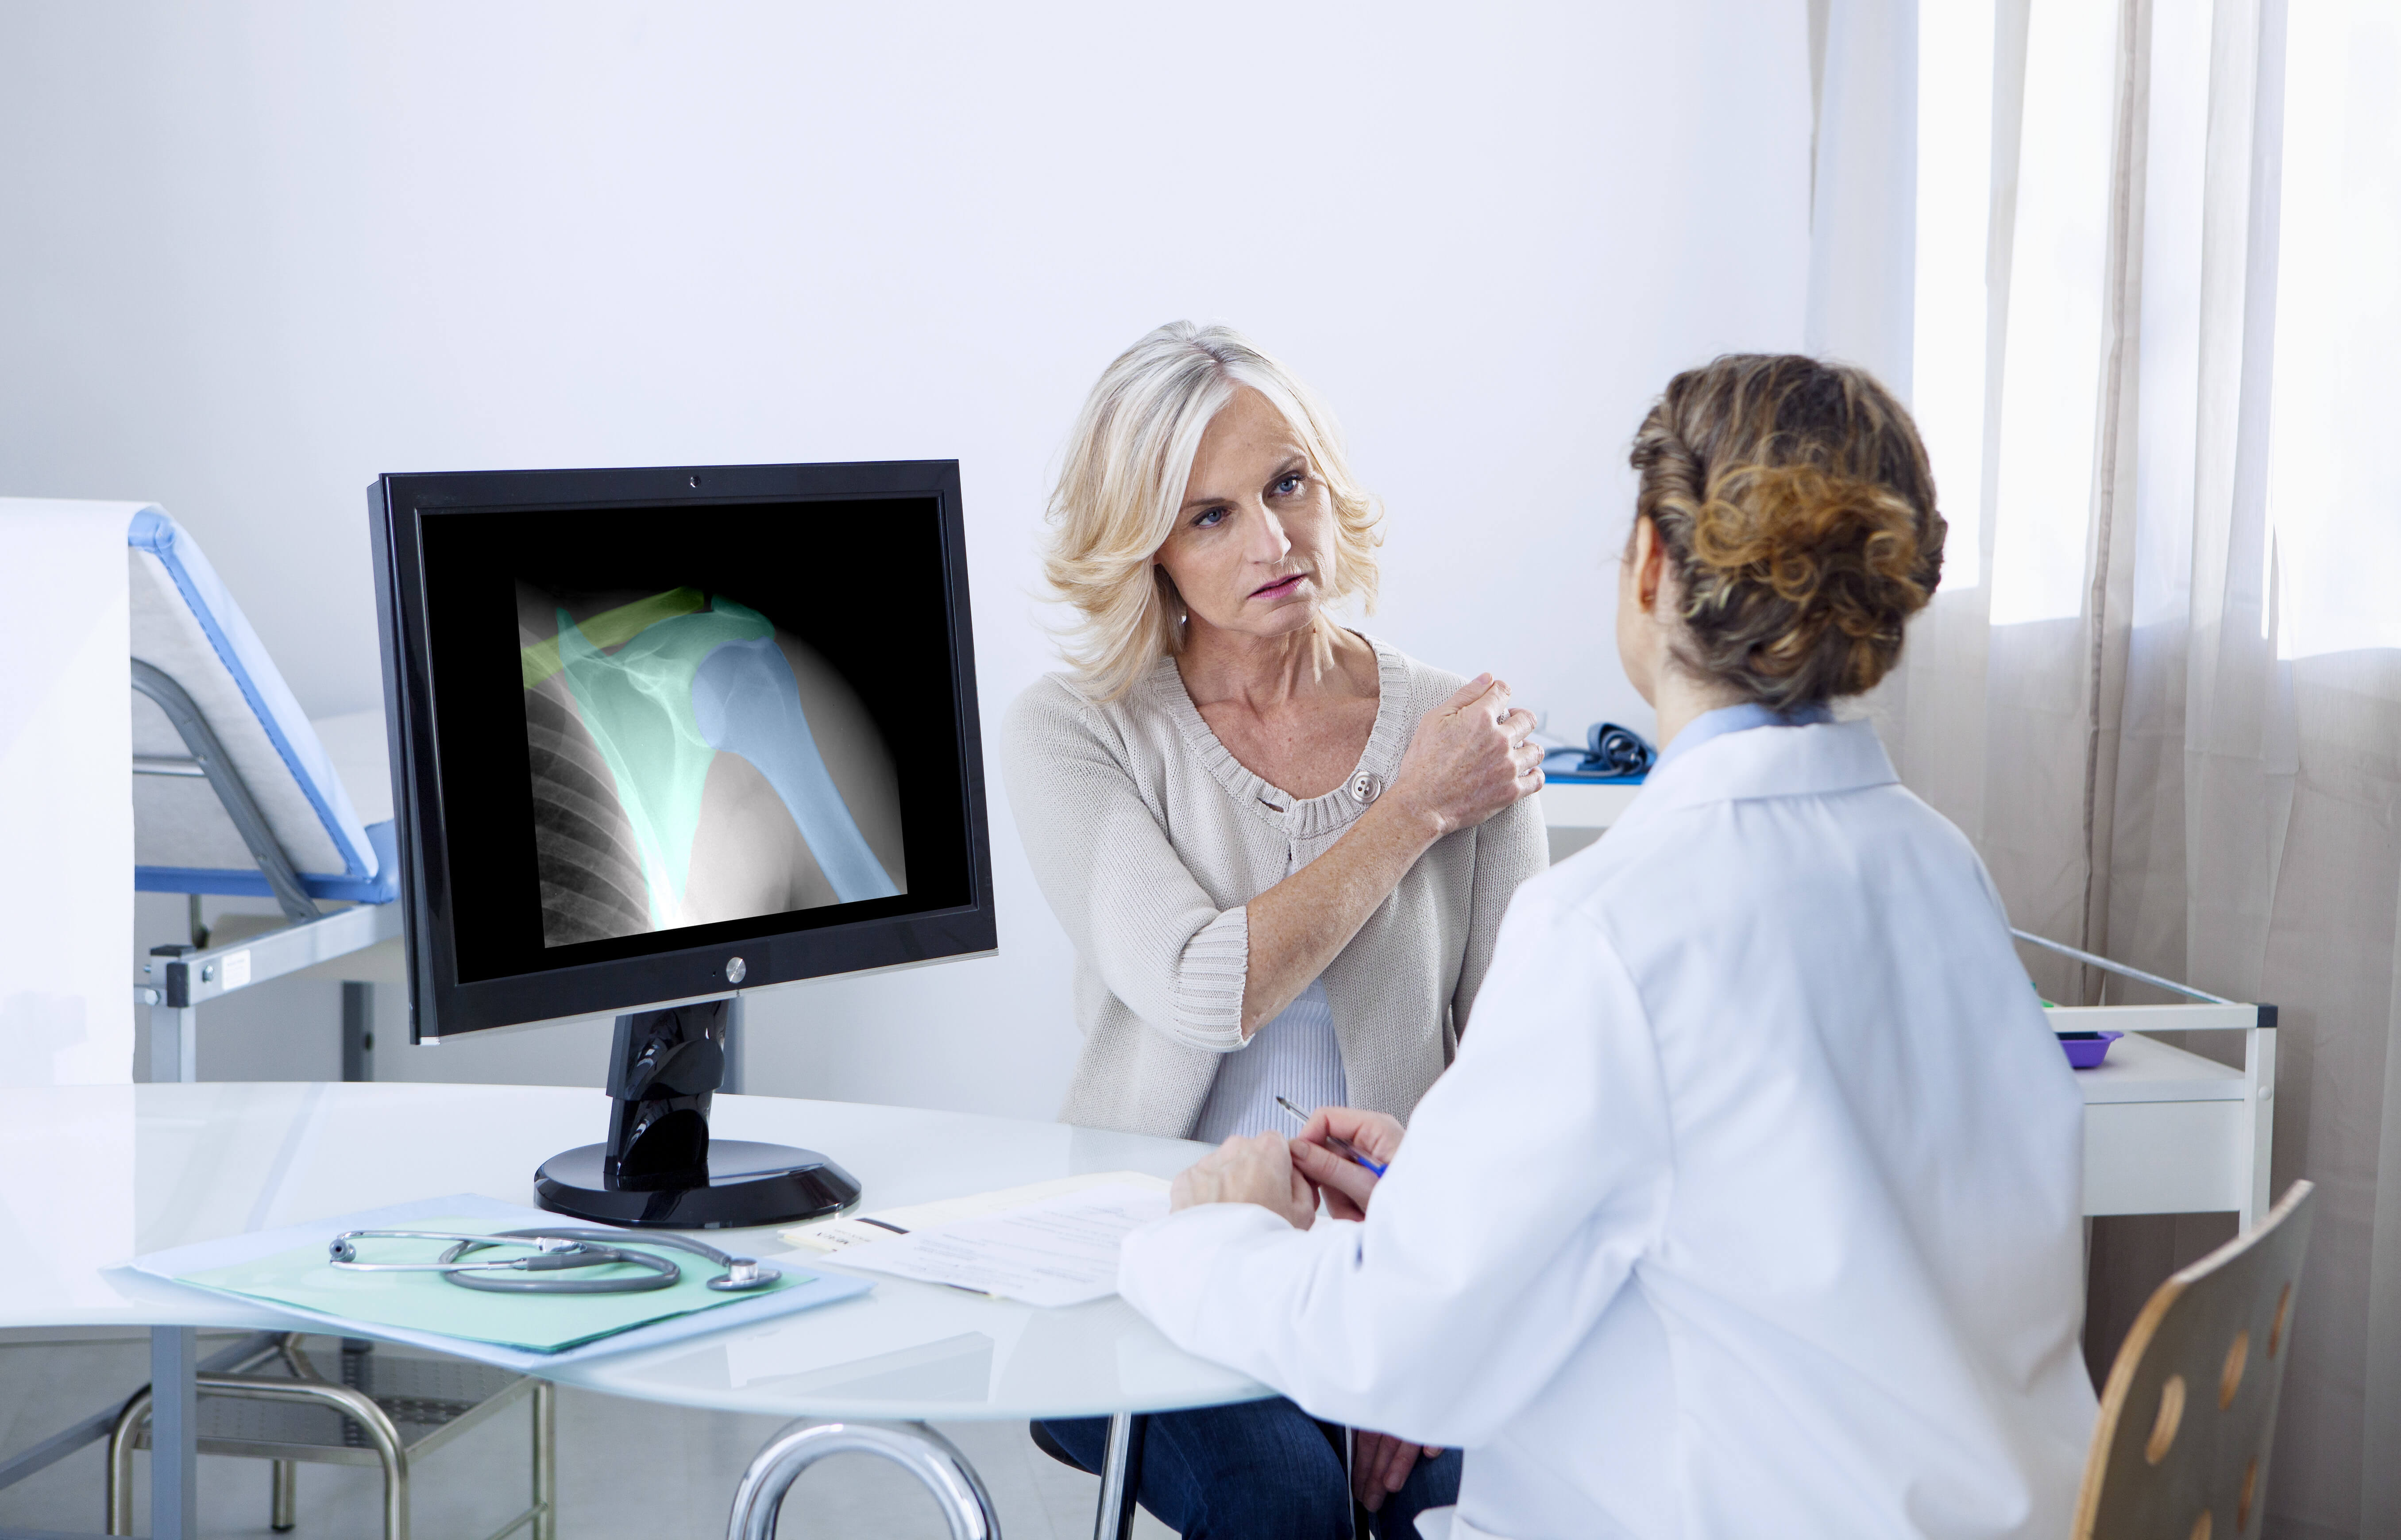 Female patient consulting with female doctor next to computer screen with x-ray displayed.